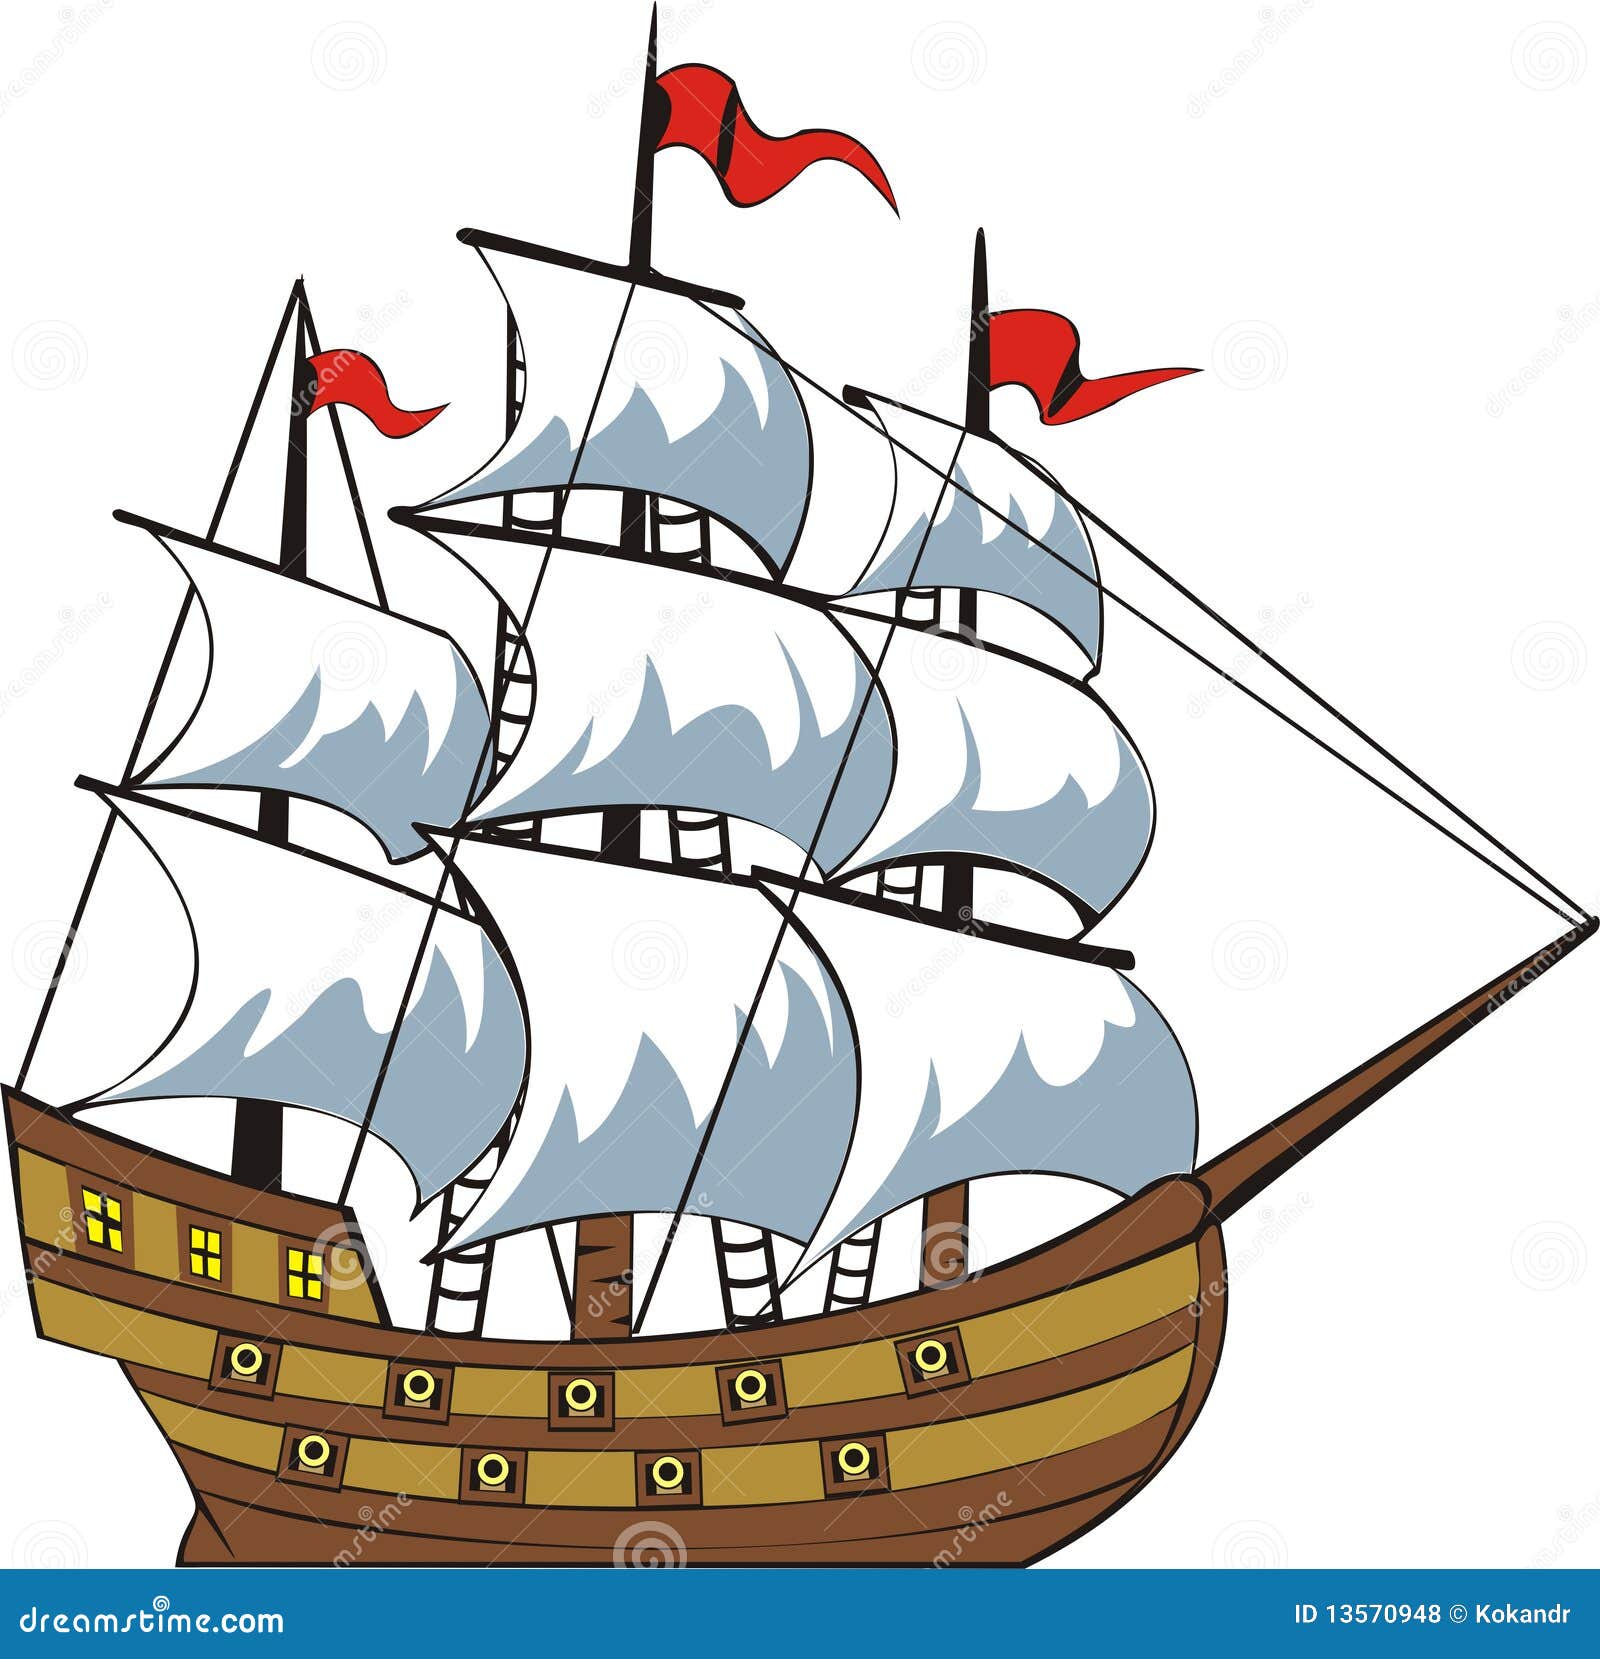 clipart of a ship - photo #25